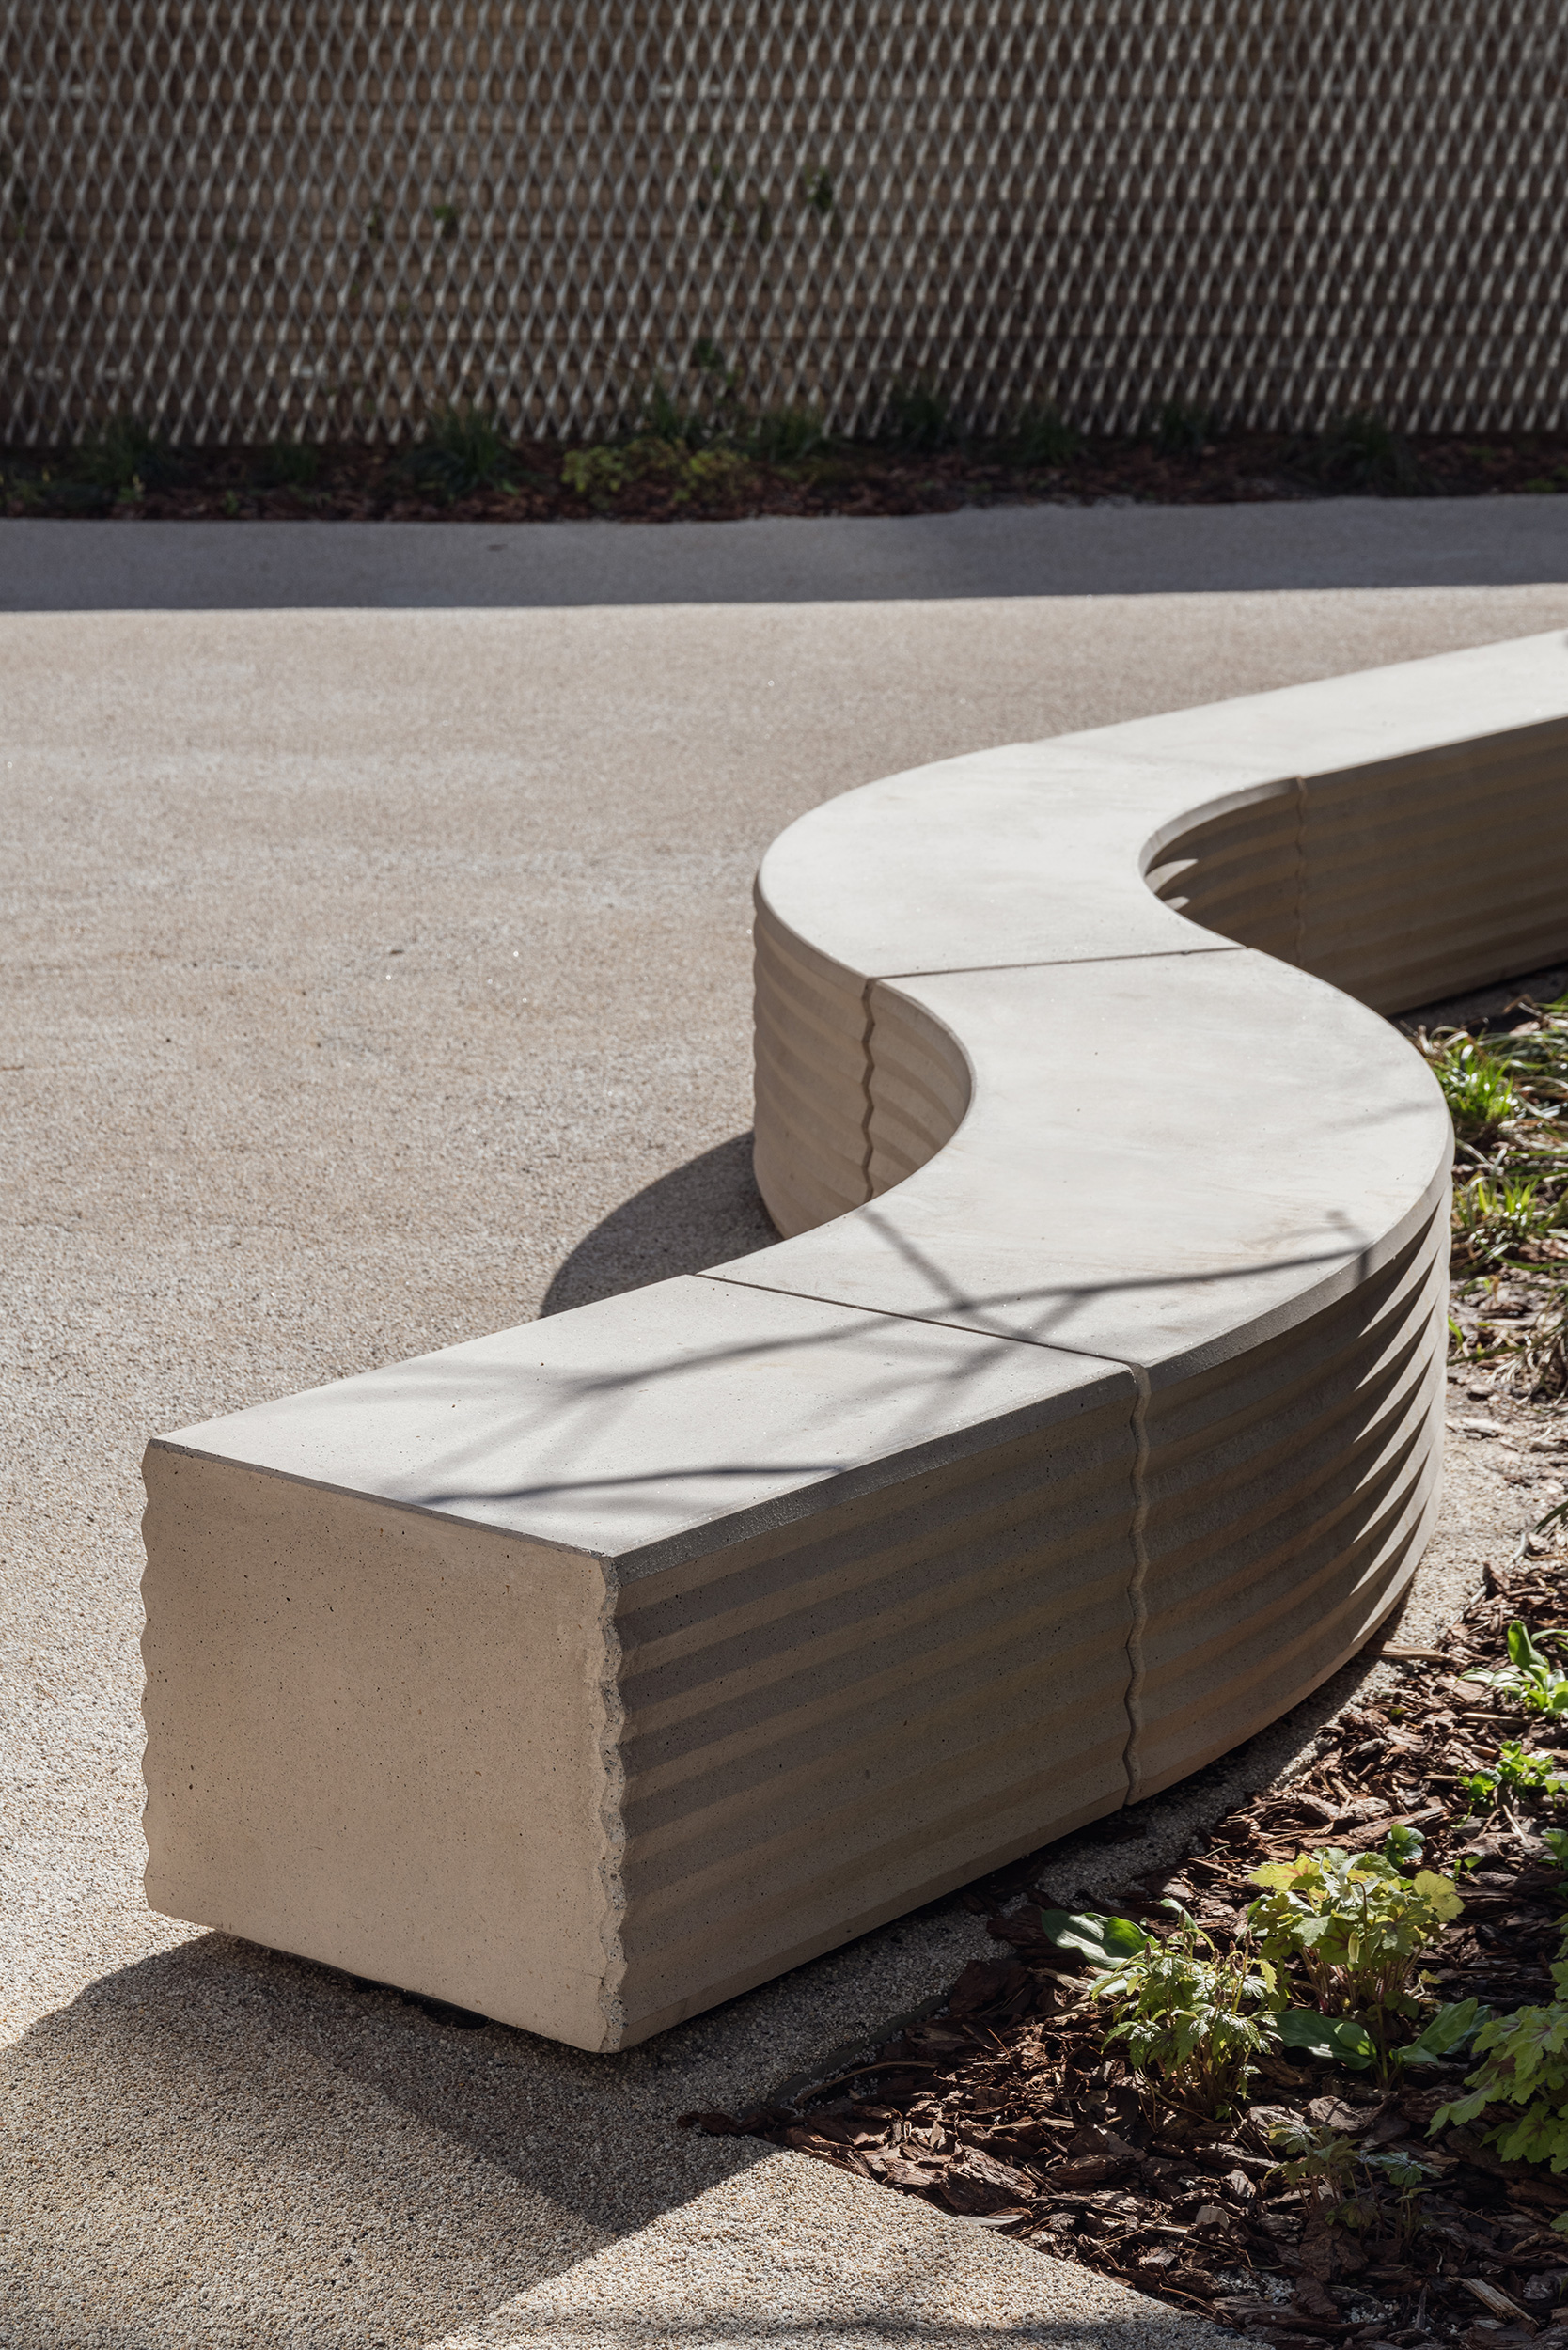 Concrete benches with its front and back faces in zig-zag geometry